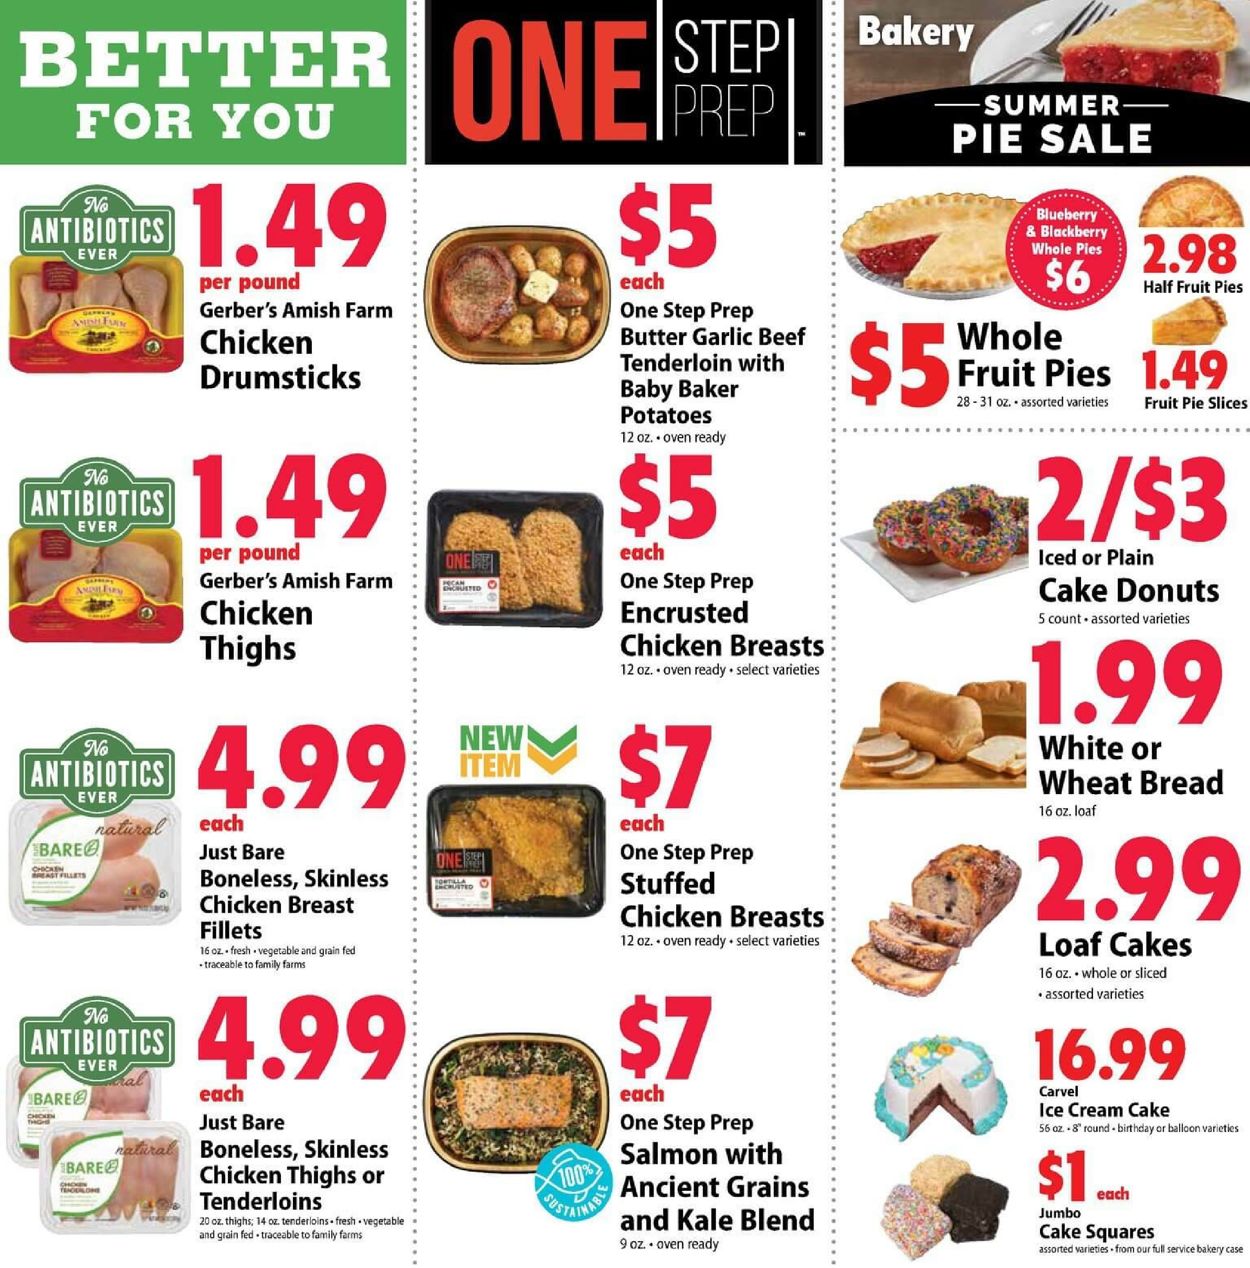 Festival Foods Current weekly ad 05/29 - 06/04/2019 [8] - frequent-ads.com